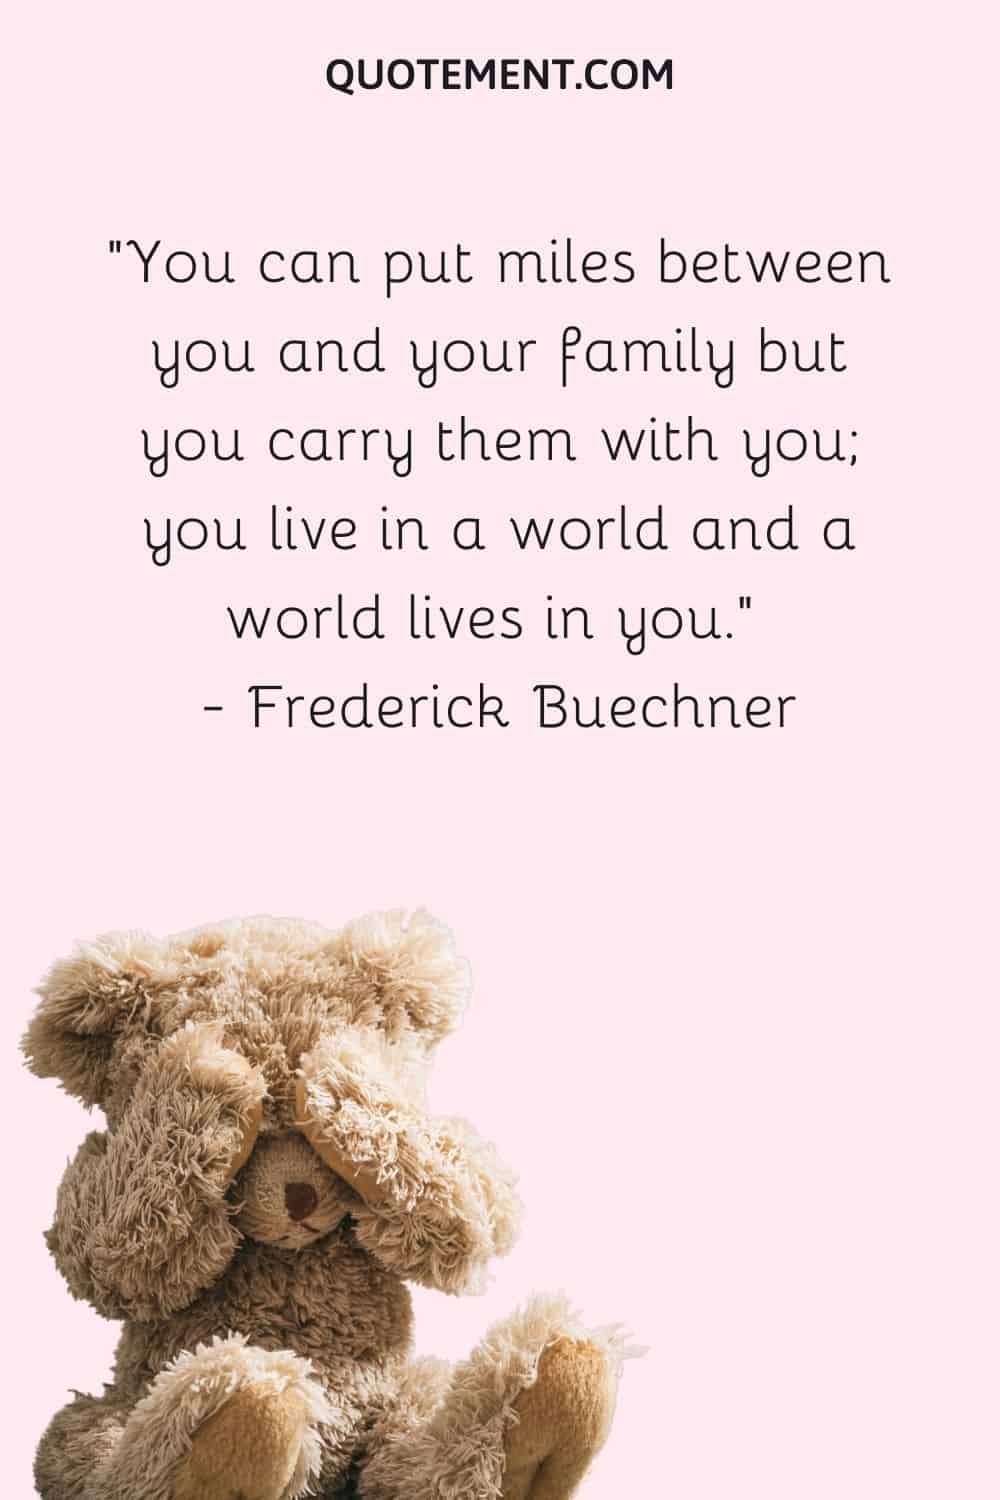 You can put miles between you and your family but you carry them with you; you live in a world and a world lives in you. — Frederick Buechner